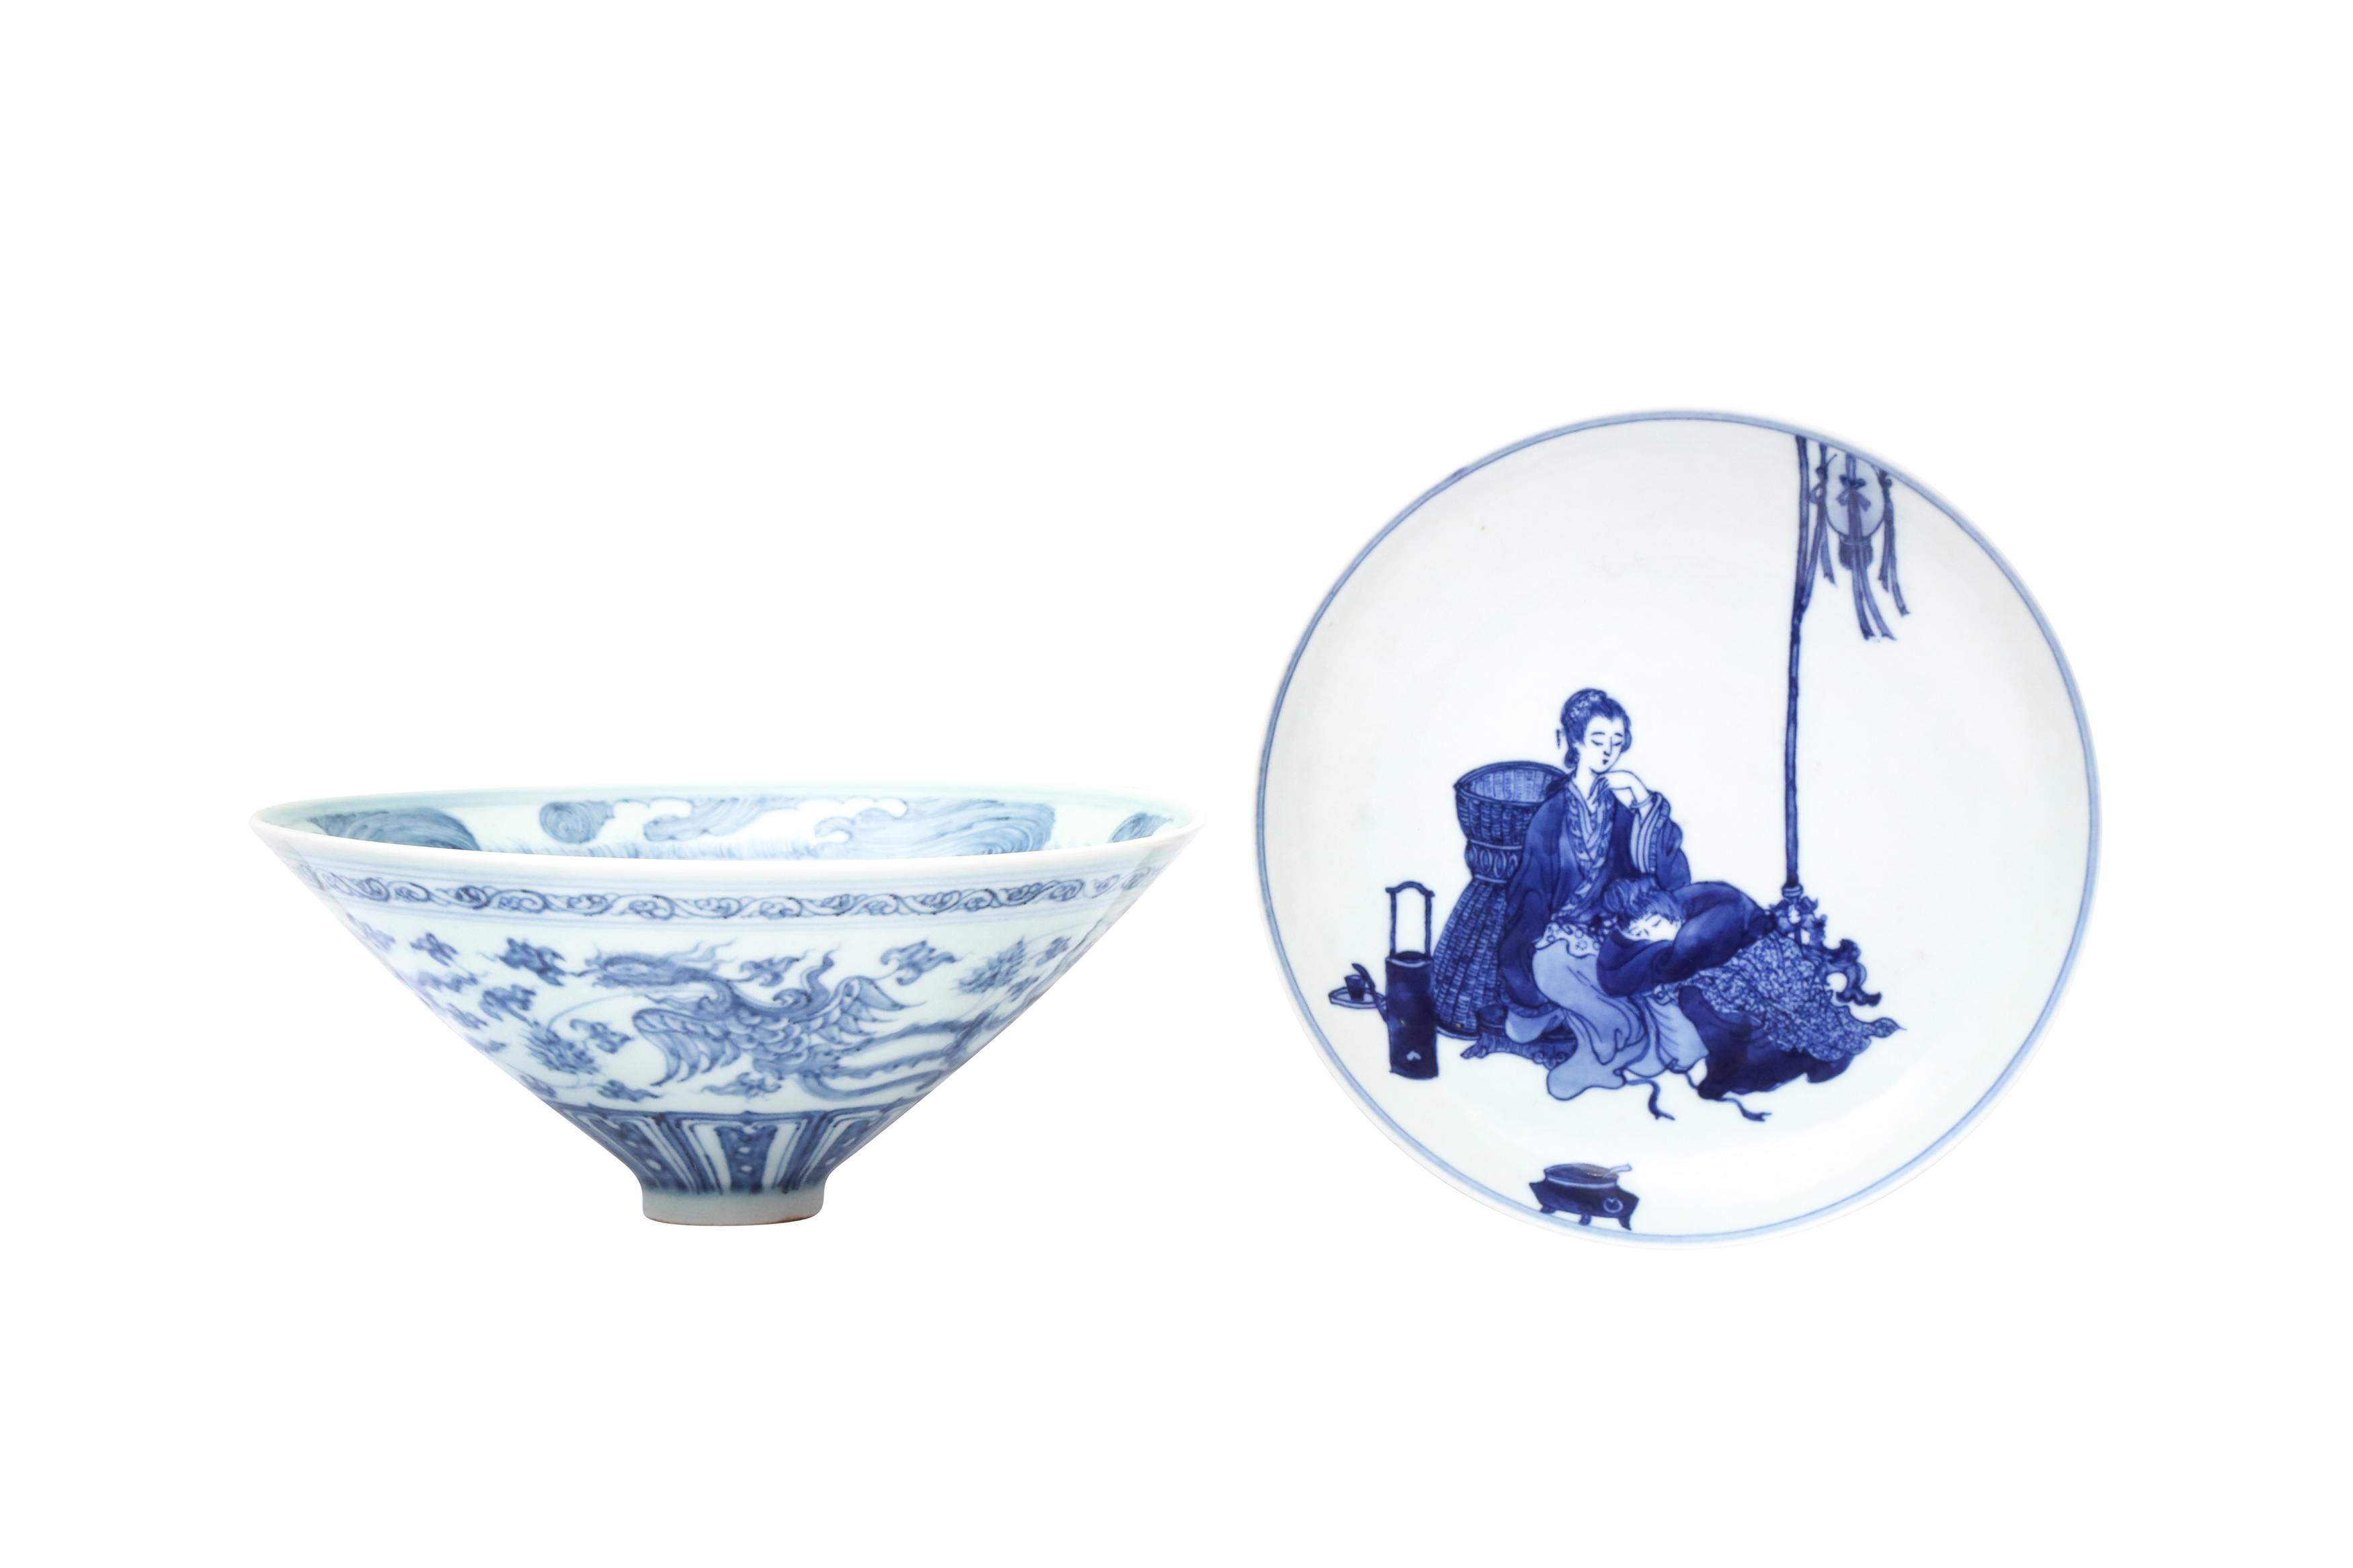 A CHINESE BLUE AND WHITE CONICAL BOWL AND A DISH FROM THE NATIONAL MUSEUM SHOP 二十世紀 青花斗笠盌及盤